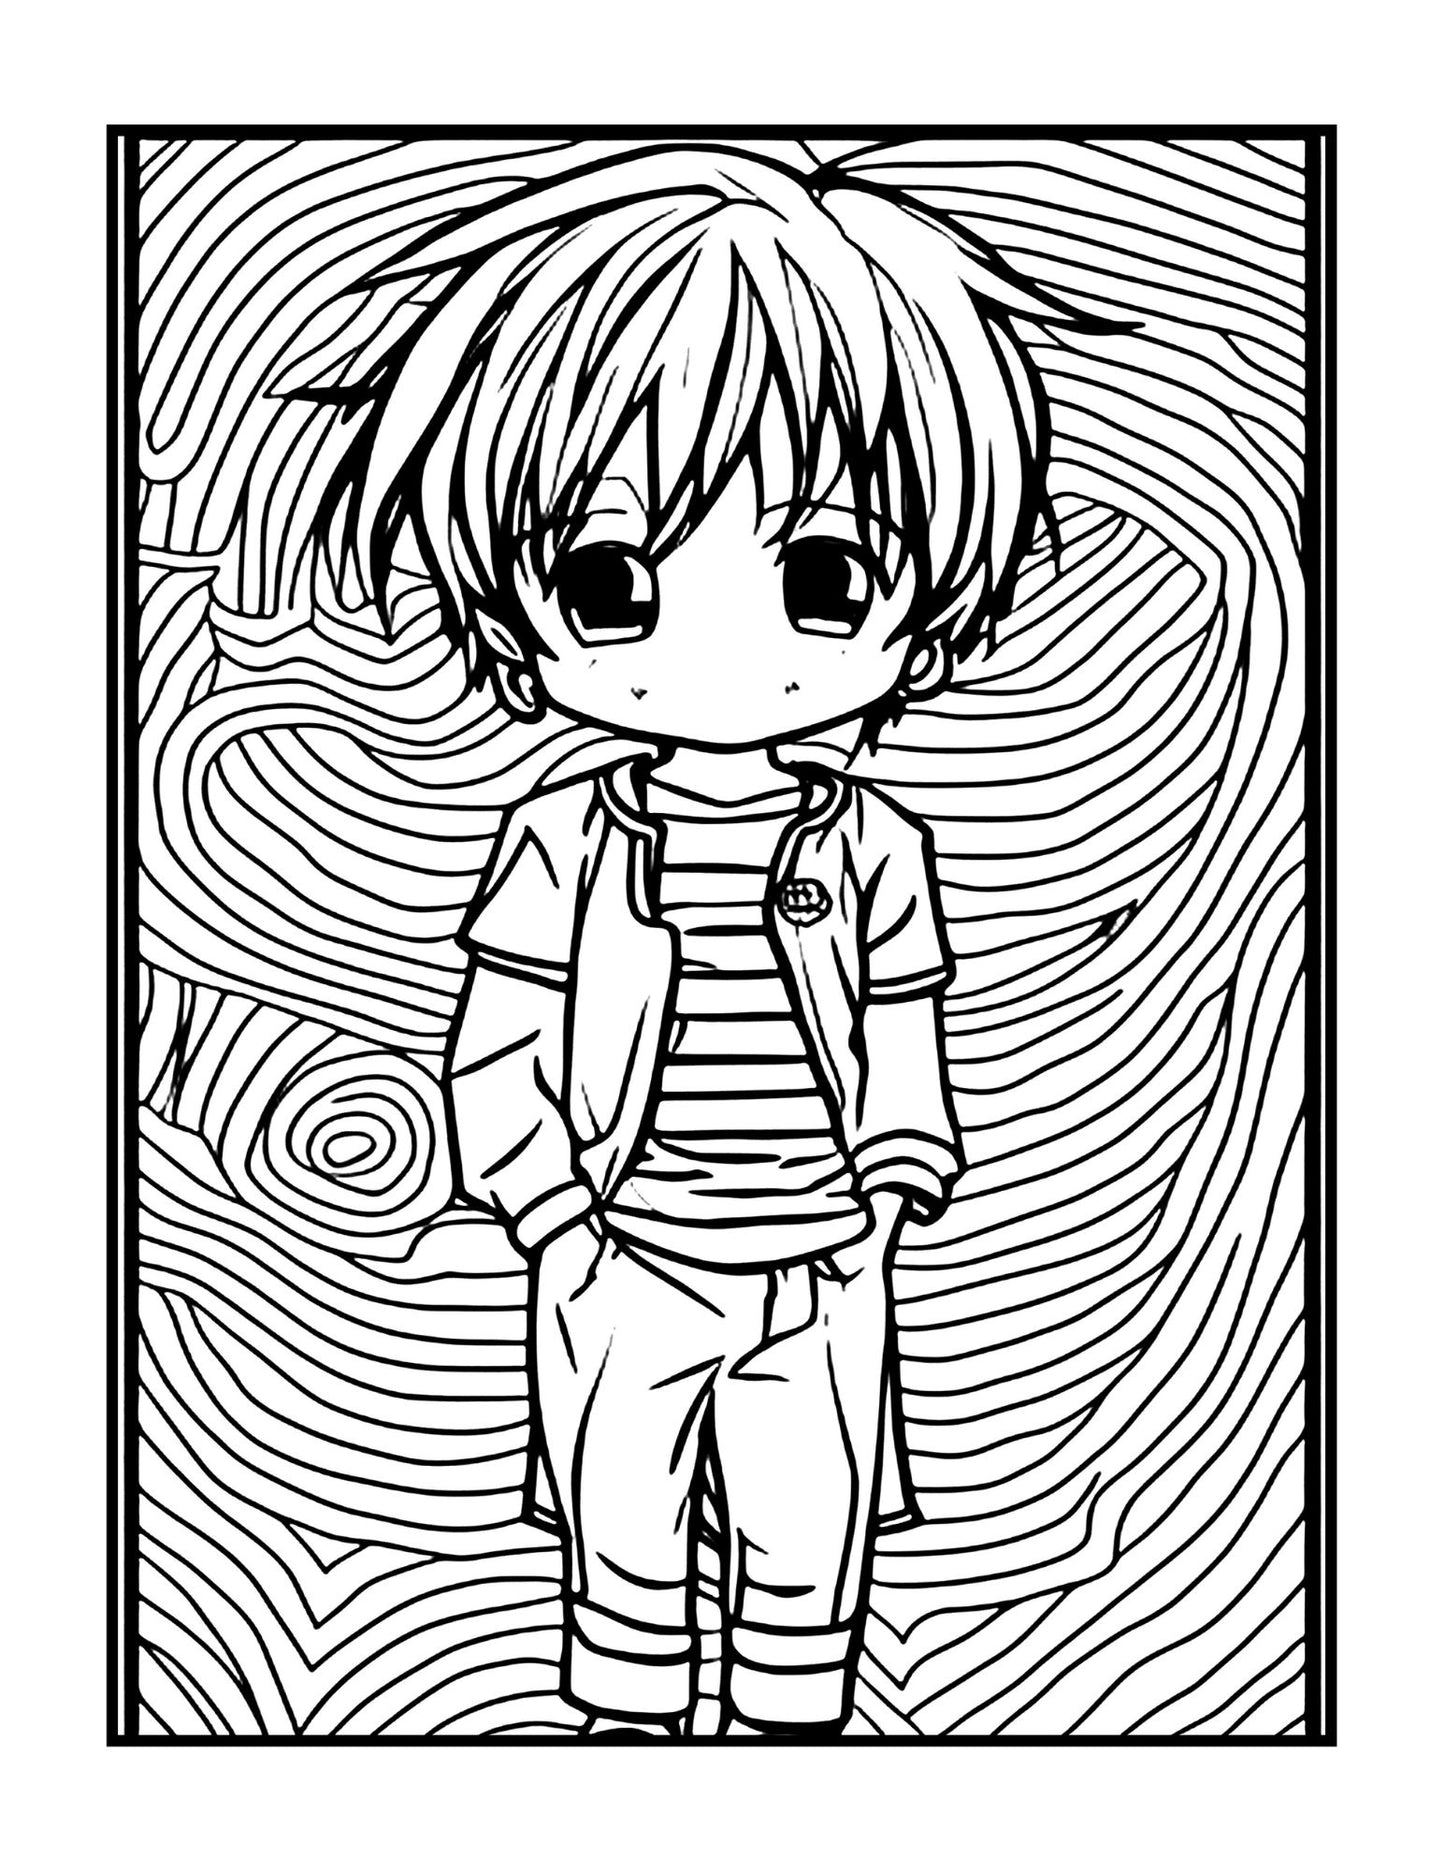 Anime Coloring Pages Gift For Anime Lover Coloring Pages For Kids Girls Boys Adults Anime Lovers Manga Coloring Birthday Gift Coloring Book